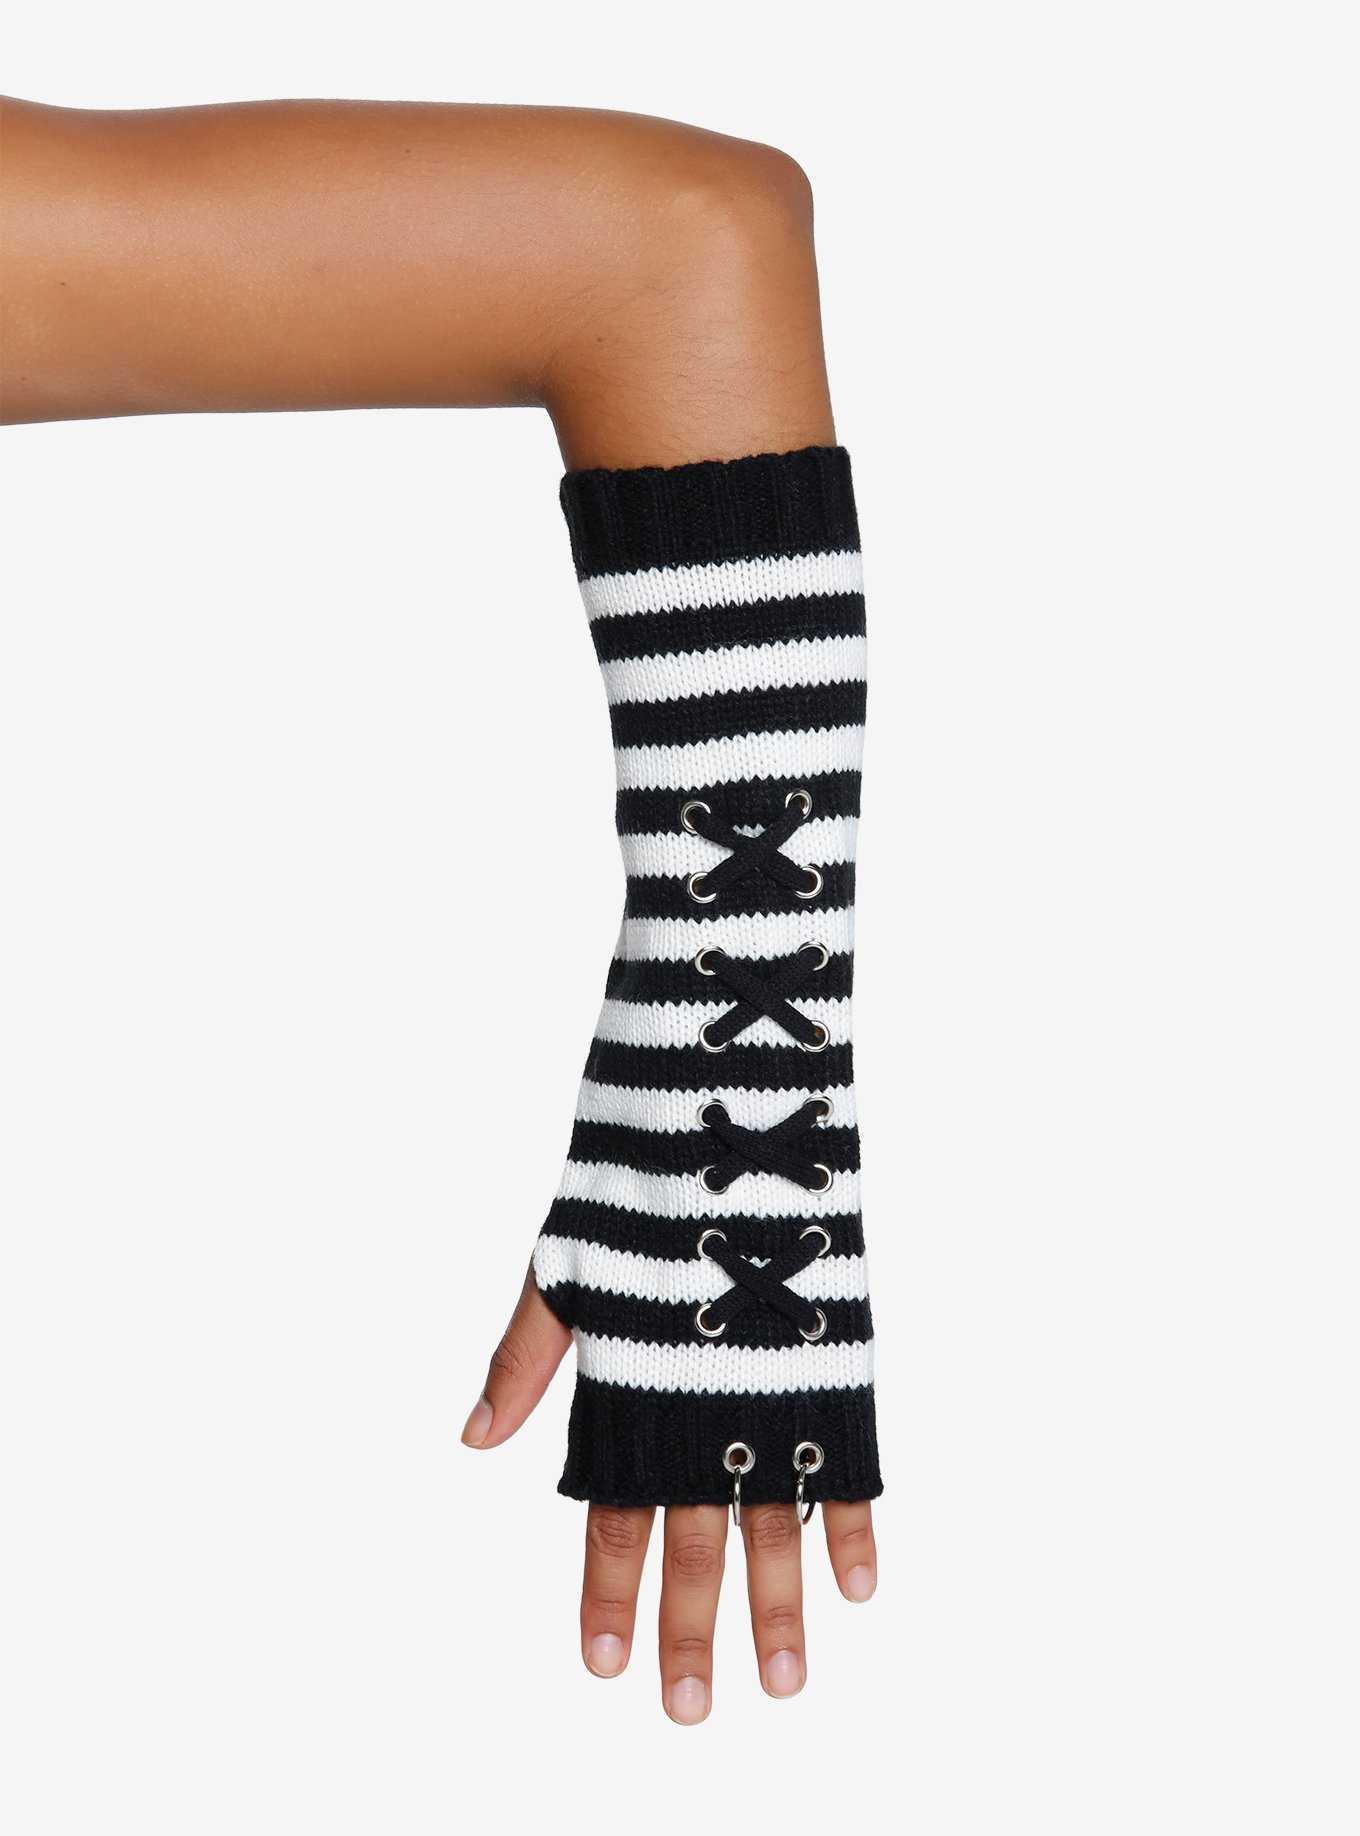 Black & White Lace-Up Hardware Arm Warmers, , hi-res